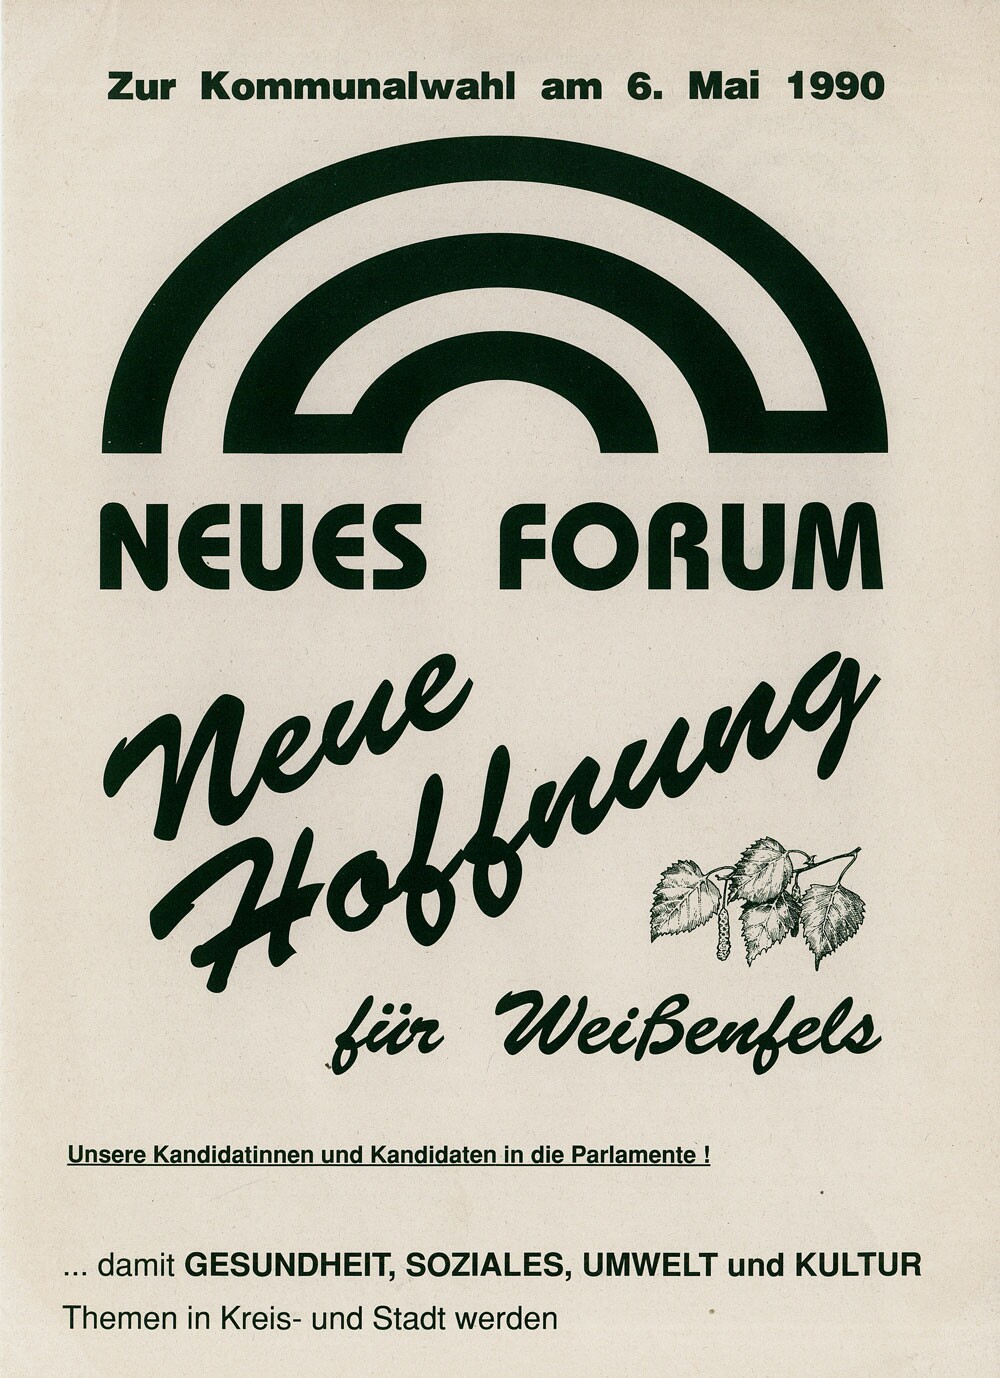 Wahlprogramm Neues Forum, 1990 Weißenfels (Museum Weißenfels CC BY-NC-SA)